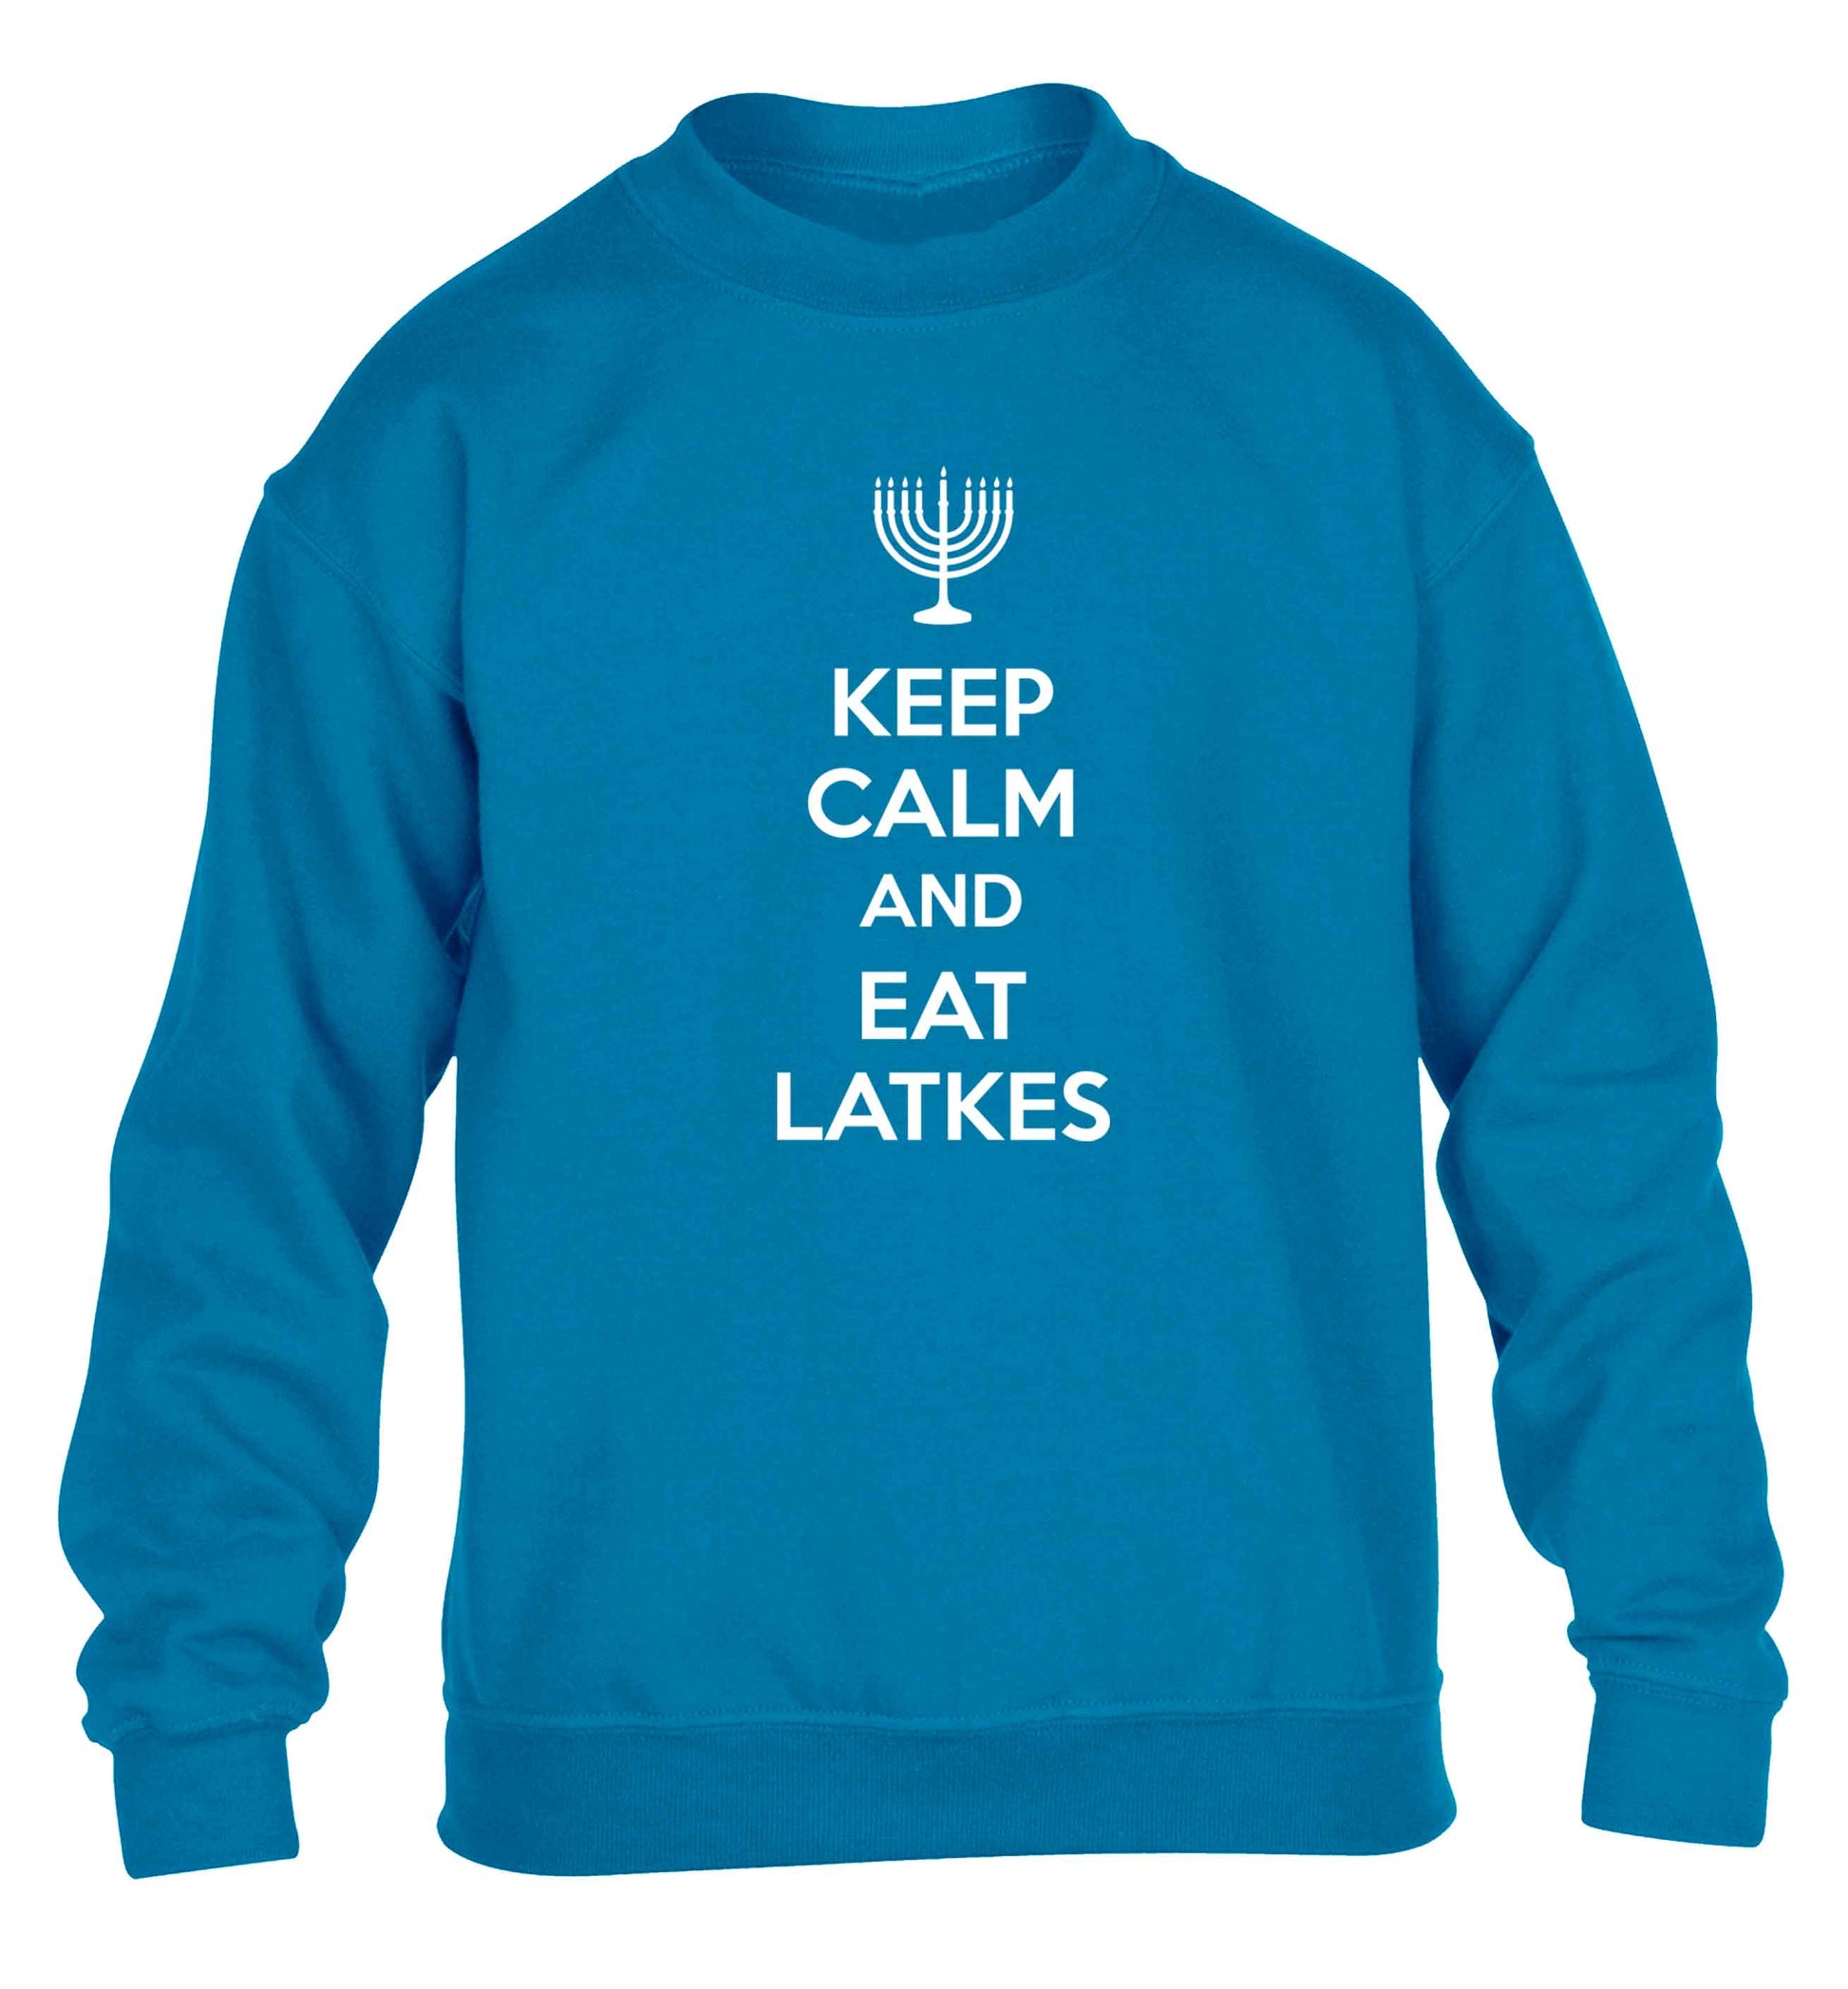 Keep calm and eat latkes children's blue sweater 12-13 Years